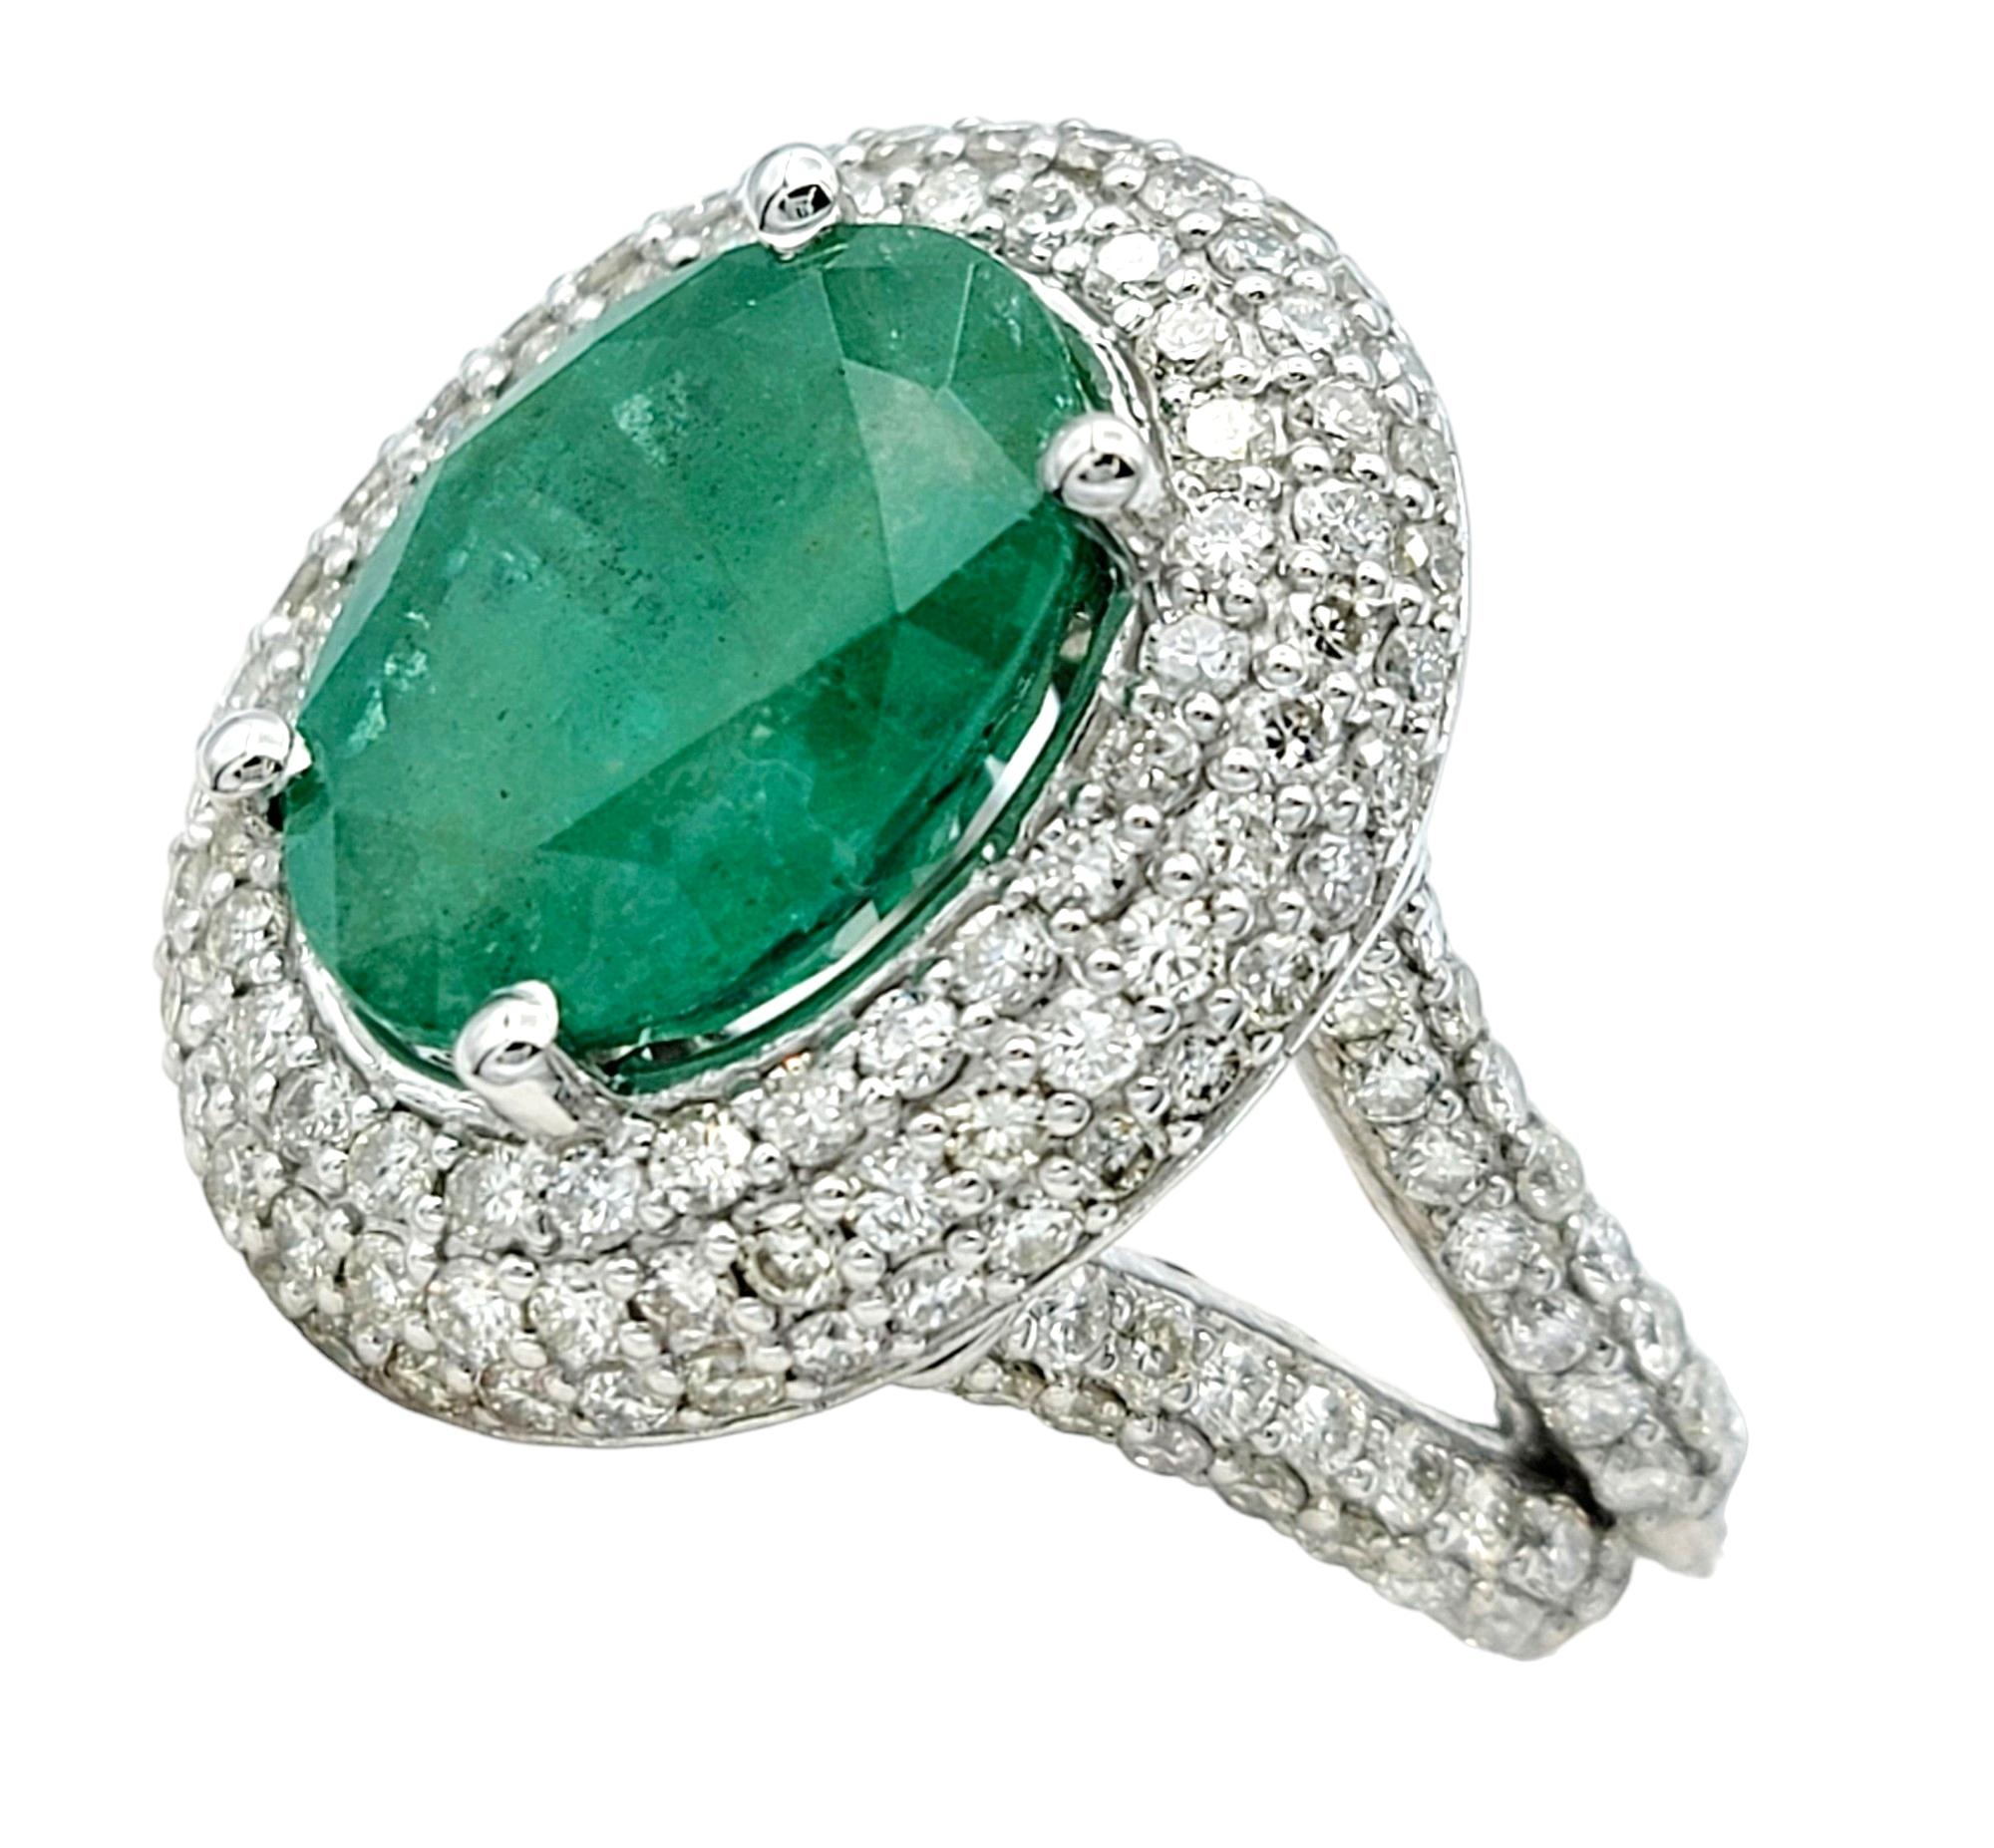 Ring Size: 6.25

This breathtaking emerald and diamond cocktail ring, set in dazzling 14 karat white gold, is the epitome of sophistication. The focal point of this luxurious piece is a captivating oval emerald, its rich green hue commanding